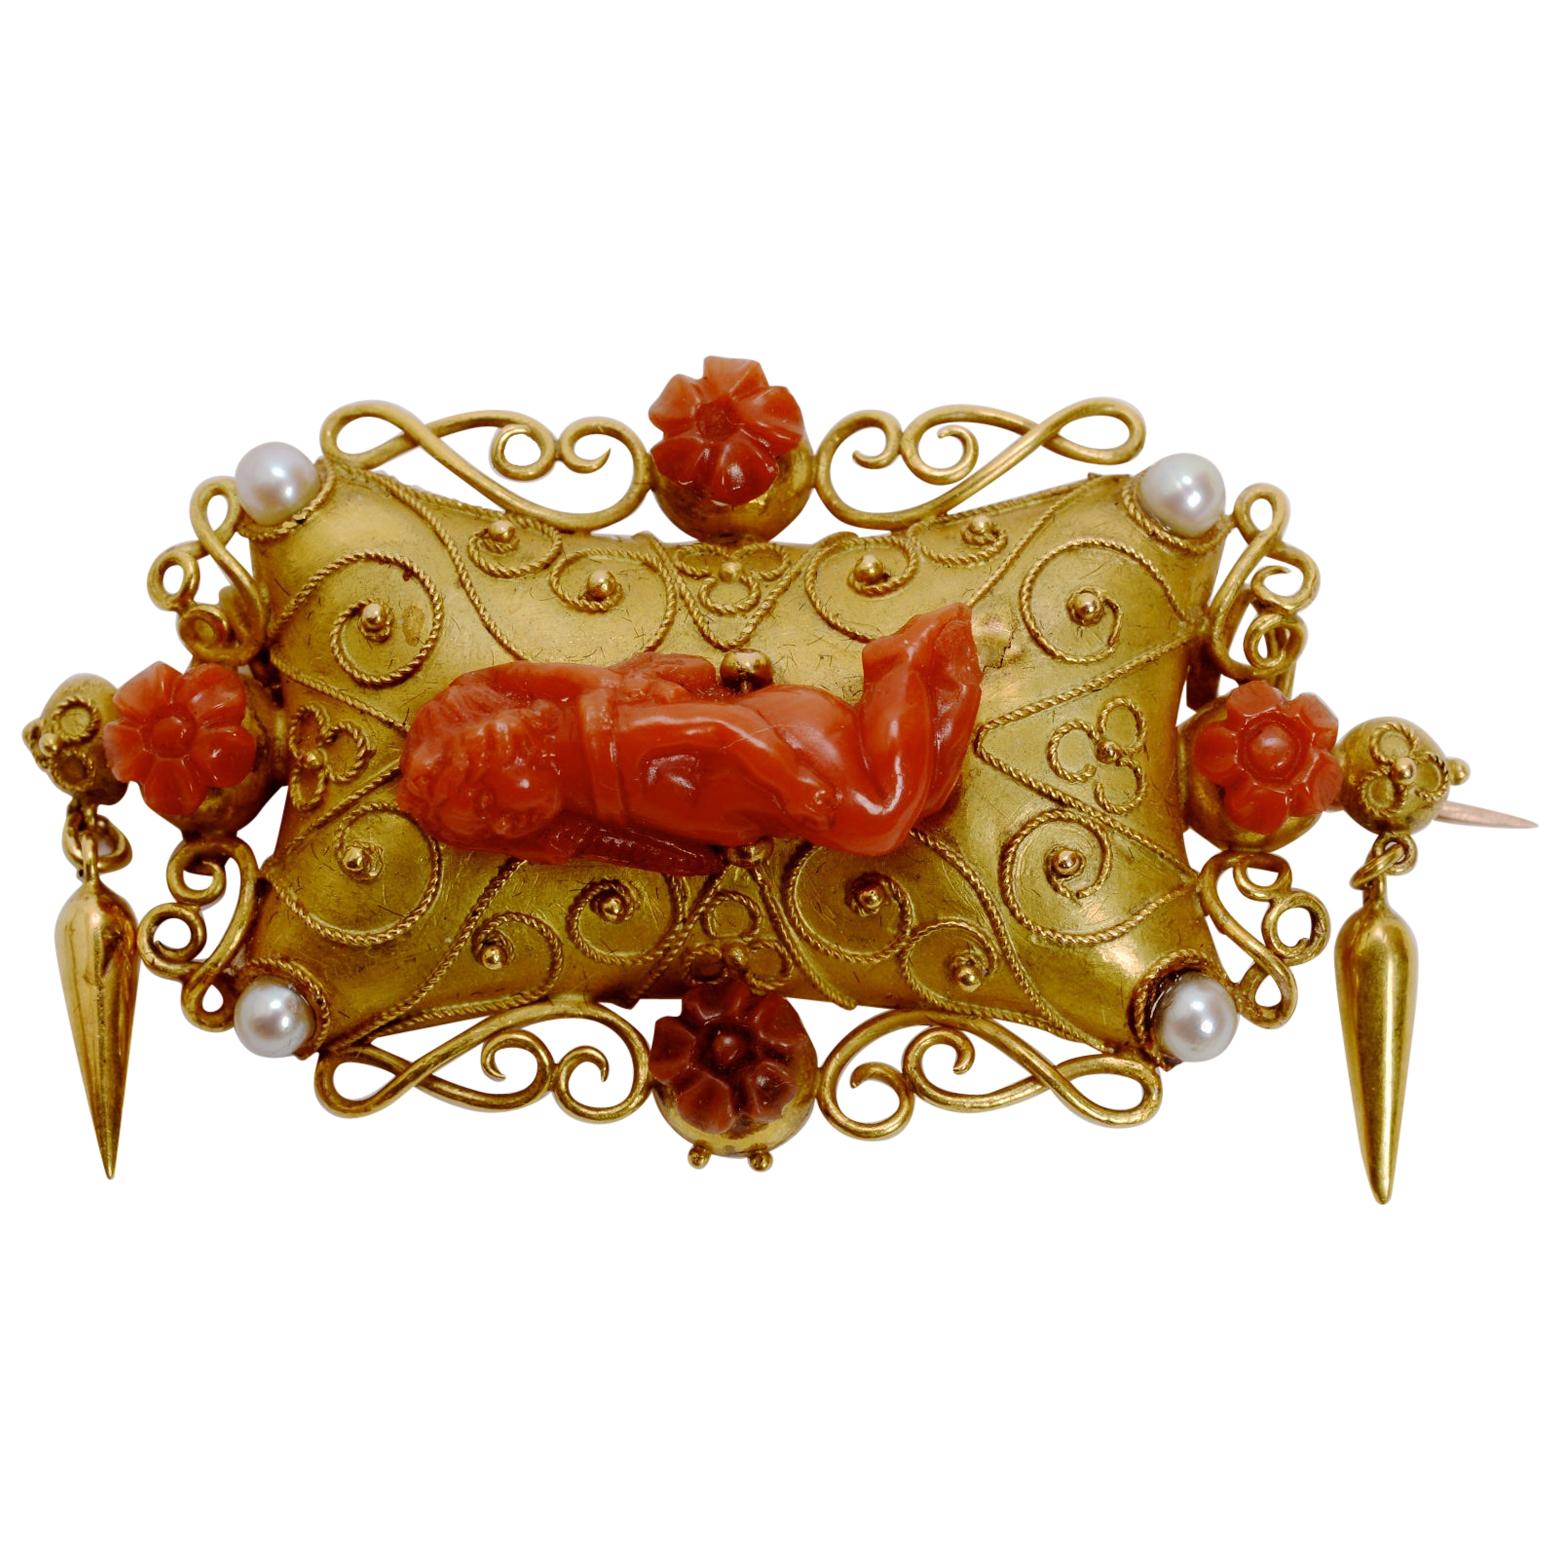 19thc Etruscan Revival 14k Gold Brooch Set with Carved Red Coral & Seed Pearls